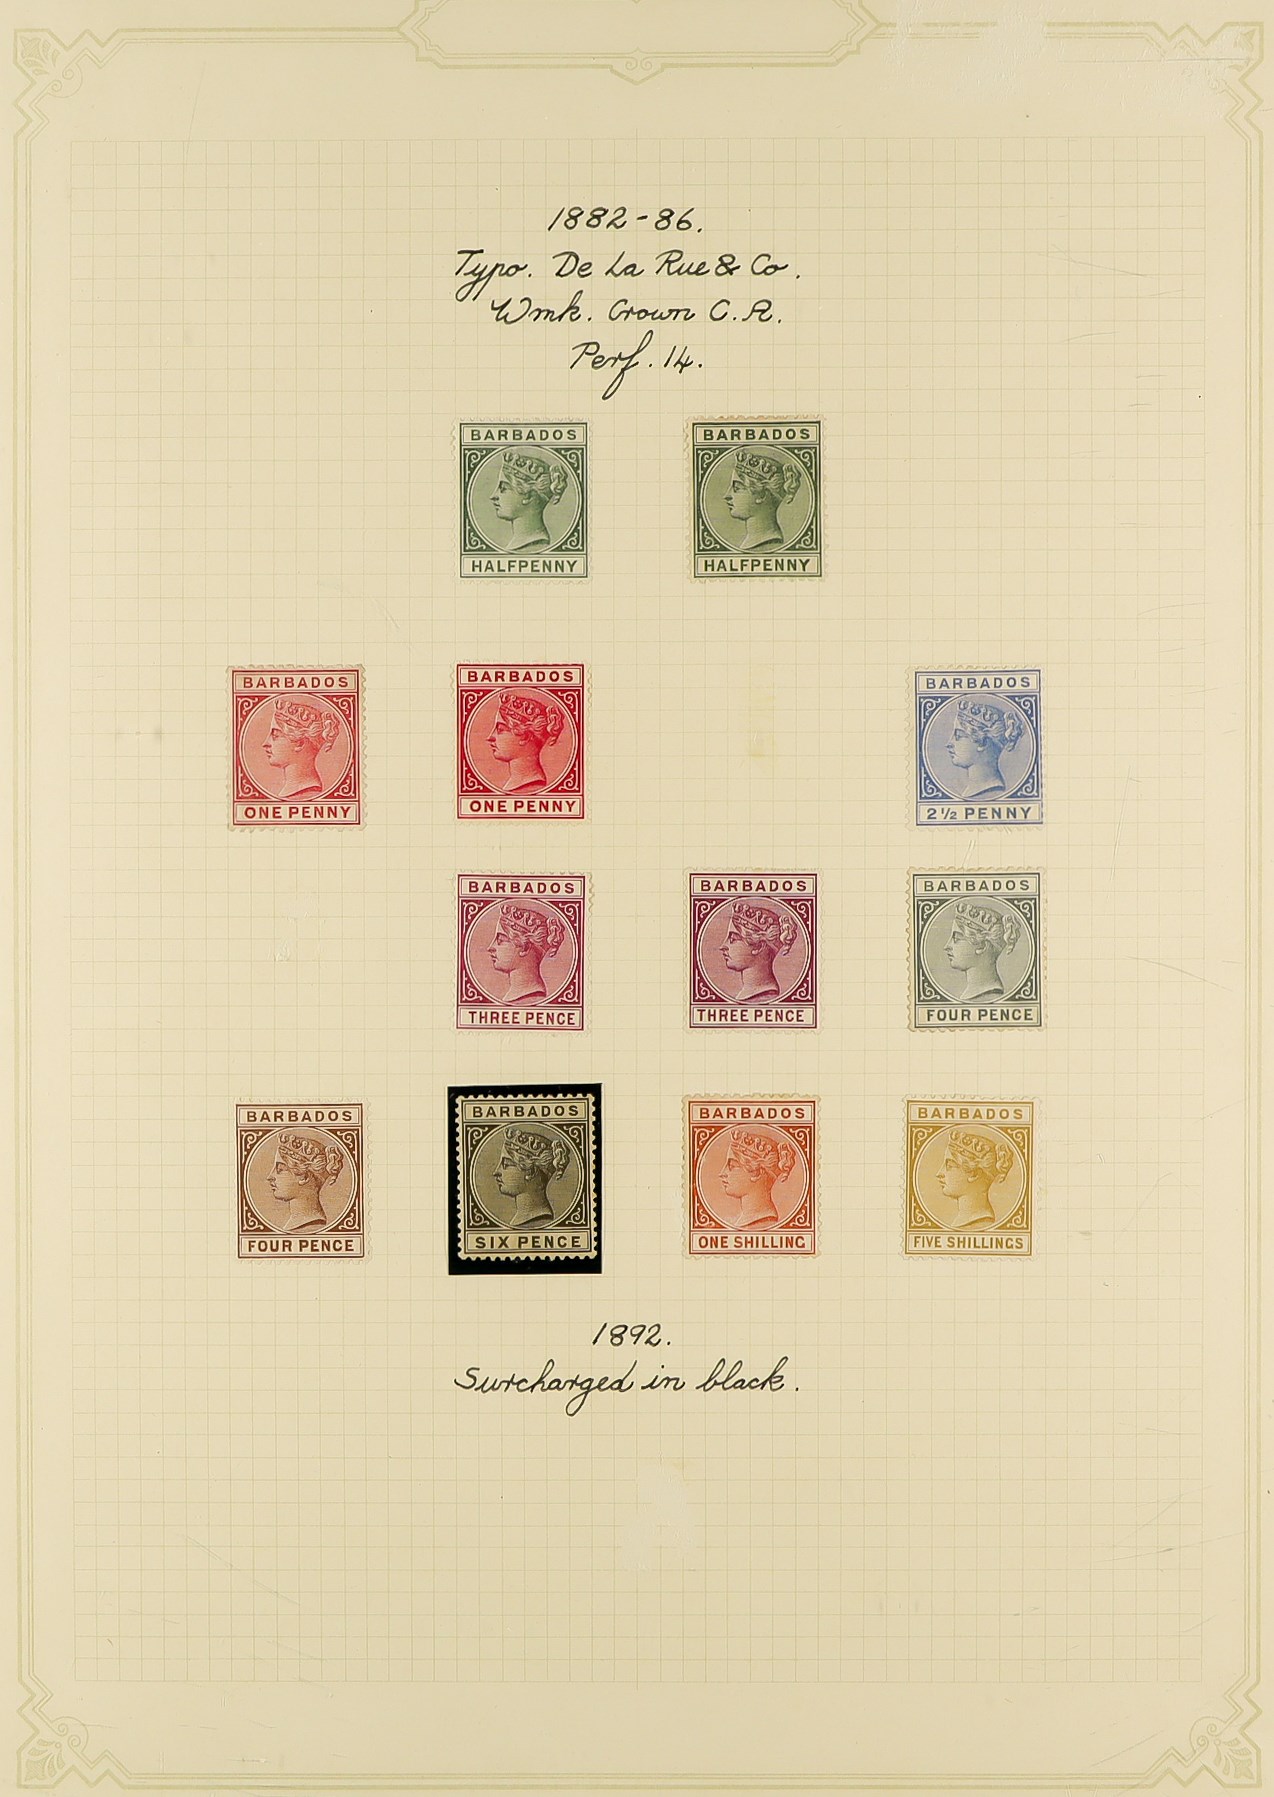 BARBADOS 1882-86 Wmk Crown CA set with all additional shades of the ½d, 1d, 3d, and the 4d grey